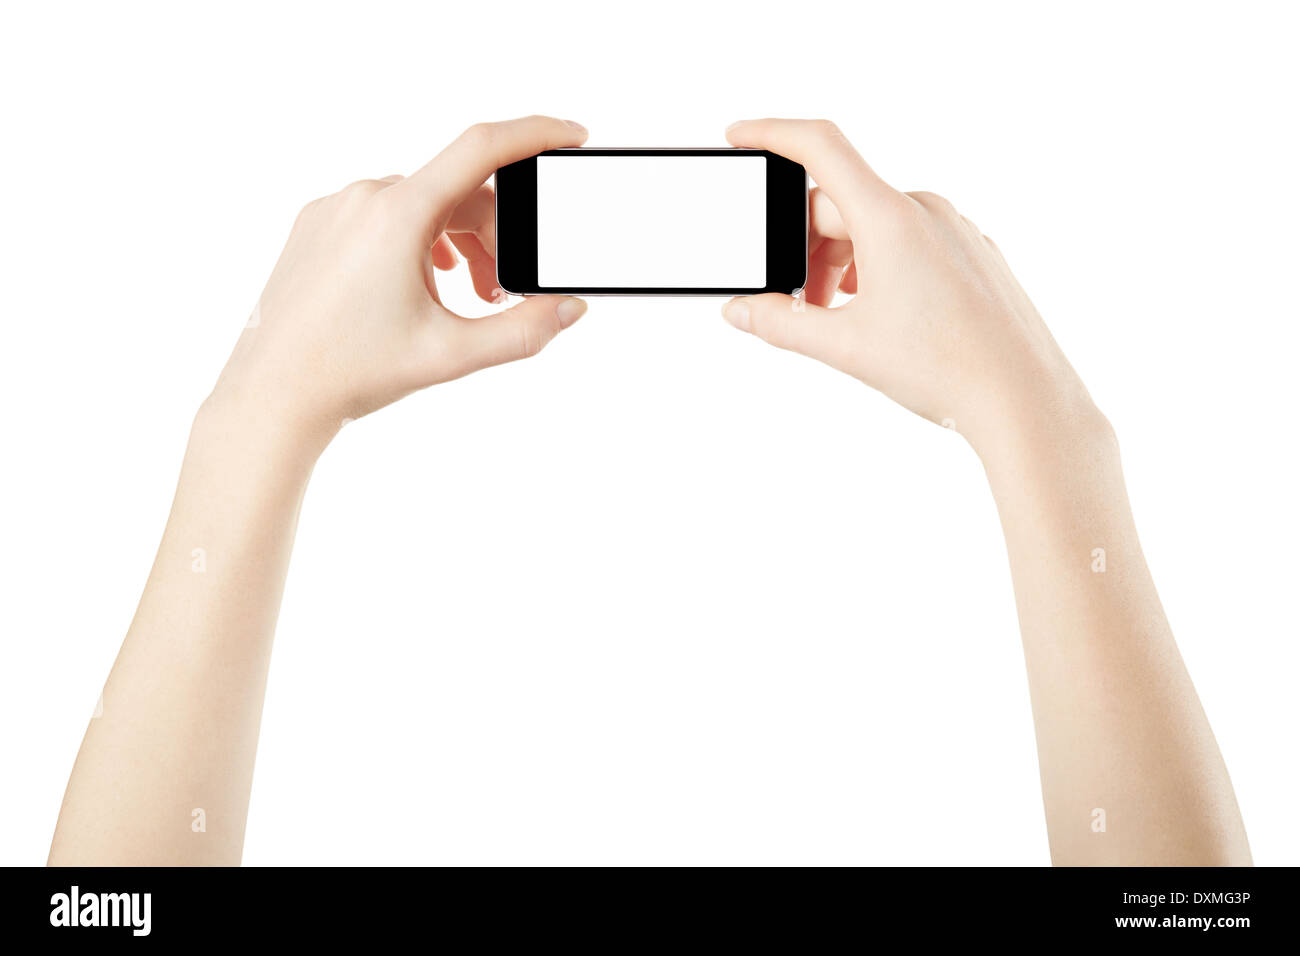 Smartphone in female hands taking photo or video Stock Photo